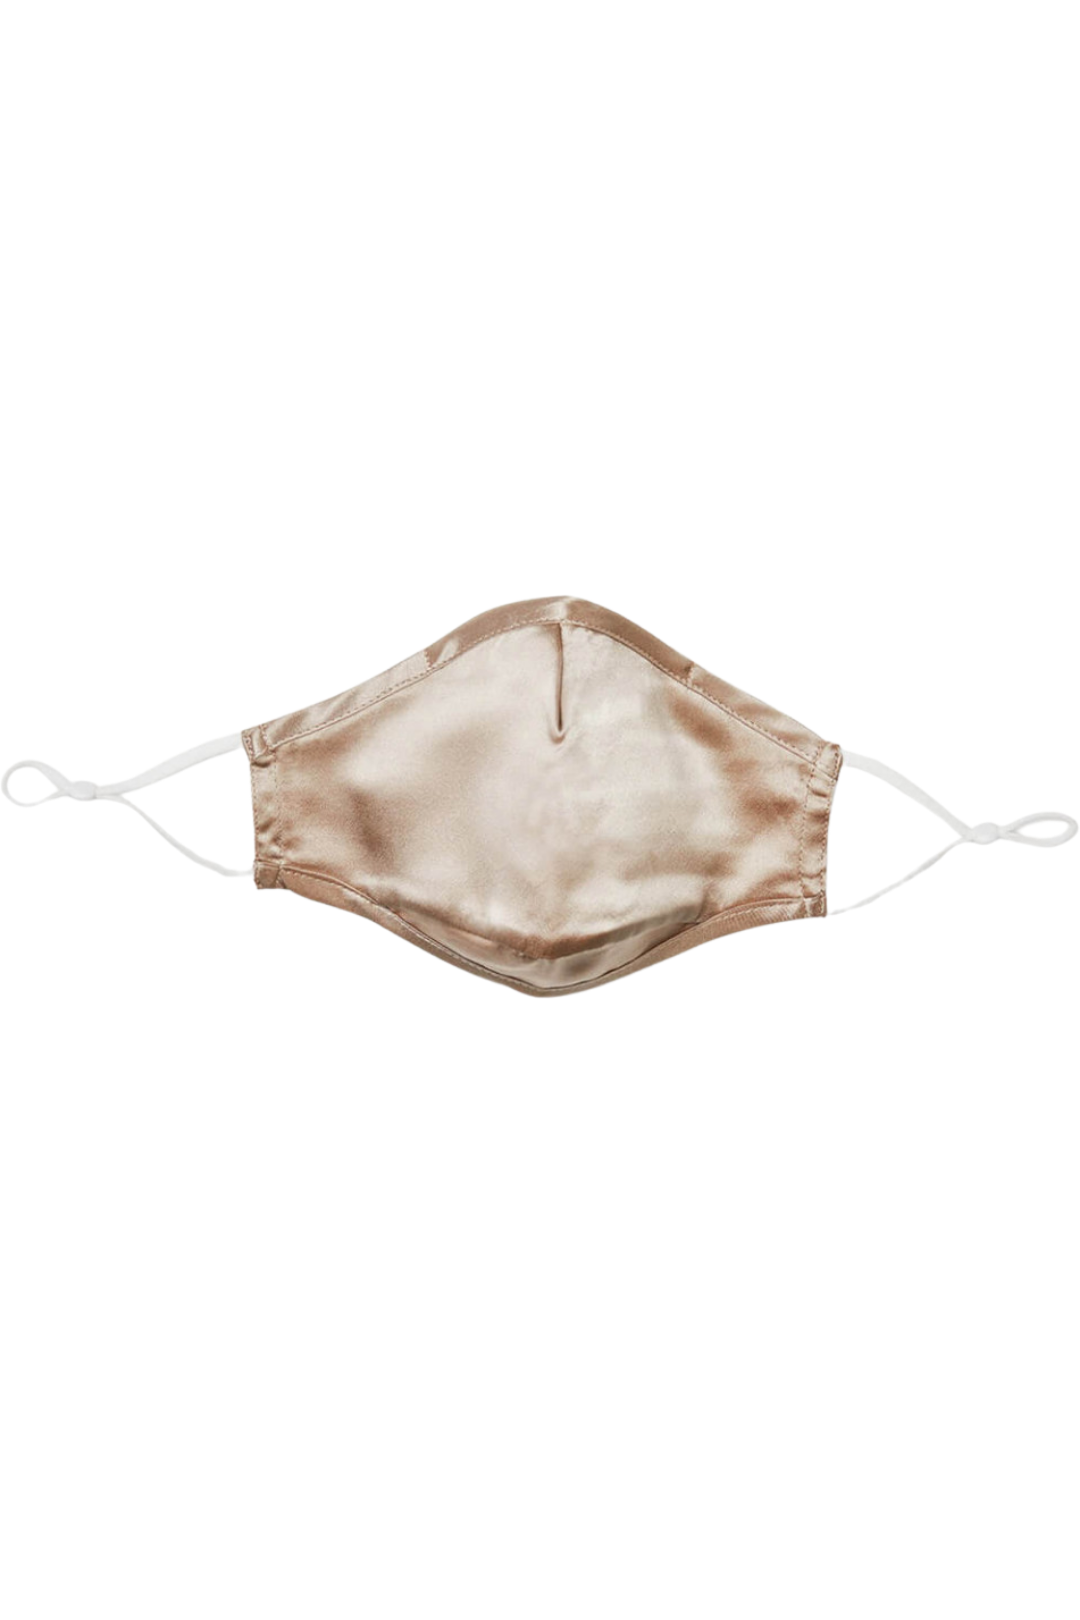 ULTRA Silk Face Mask - Champagne Gold (with Filter Pocket and Nose Wire) - BASK™